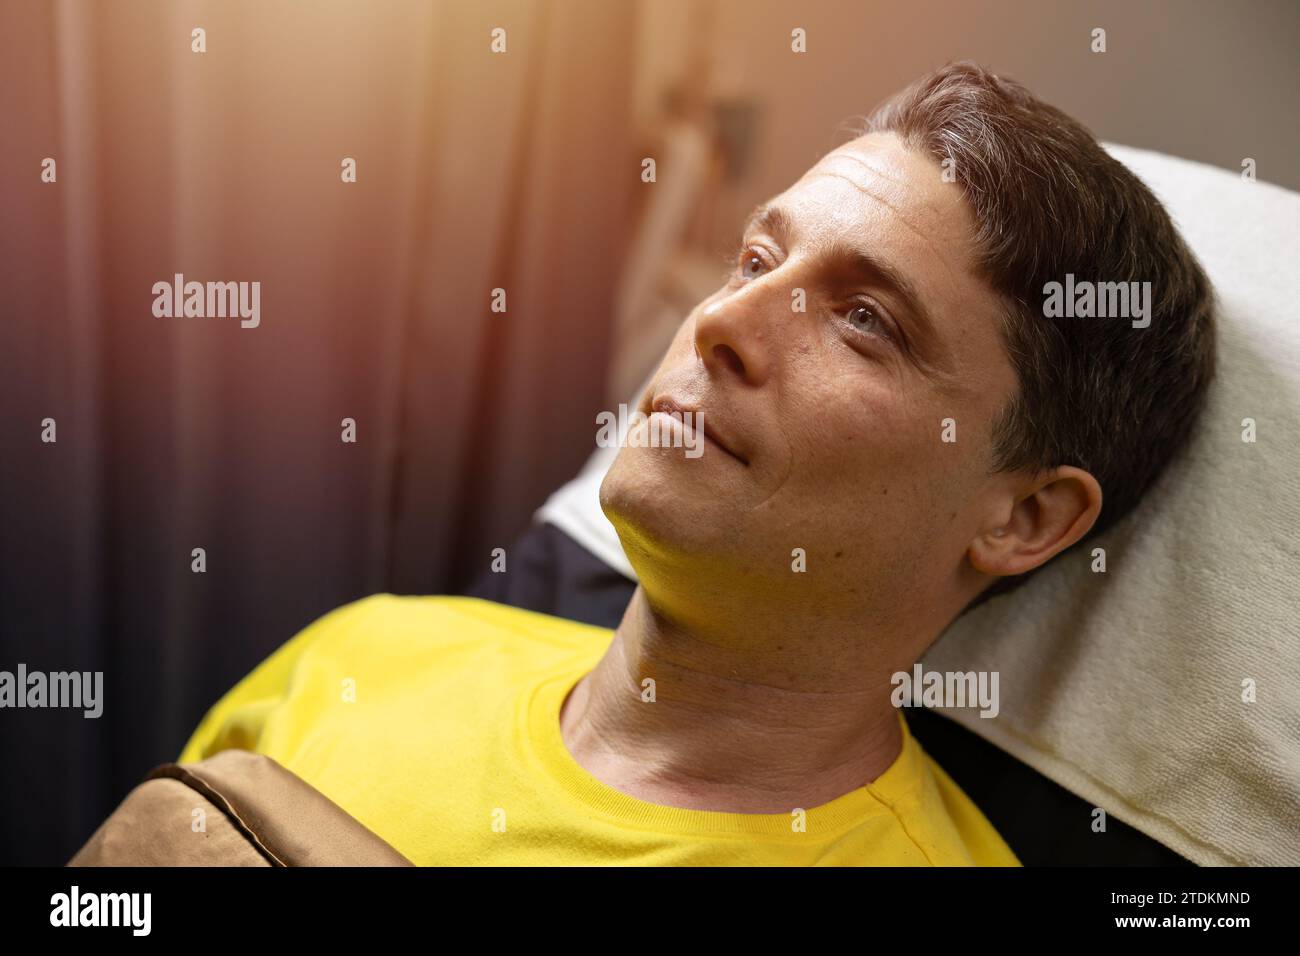 closeup caucasian adult male face head model handsome laying on cosmetic clinic bed relax smile waiting for facial treatment procedure Stock Photo